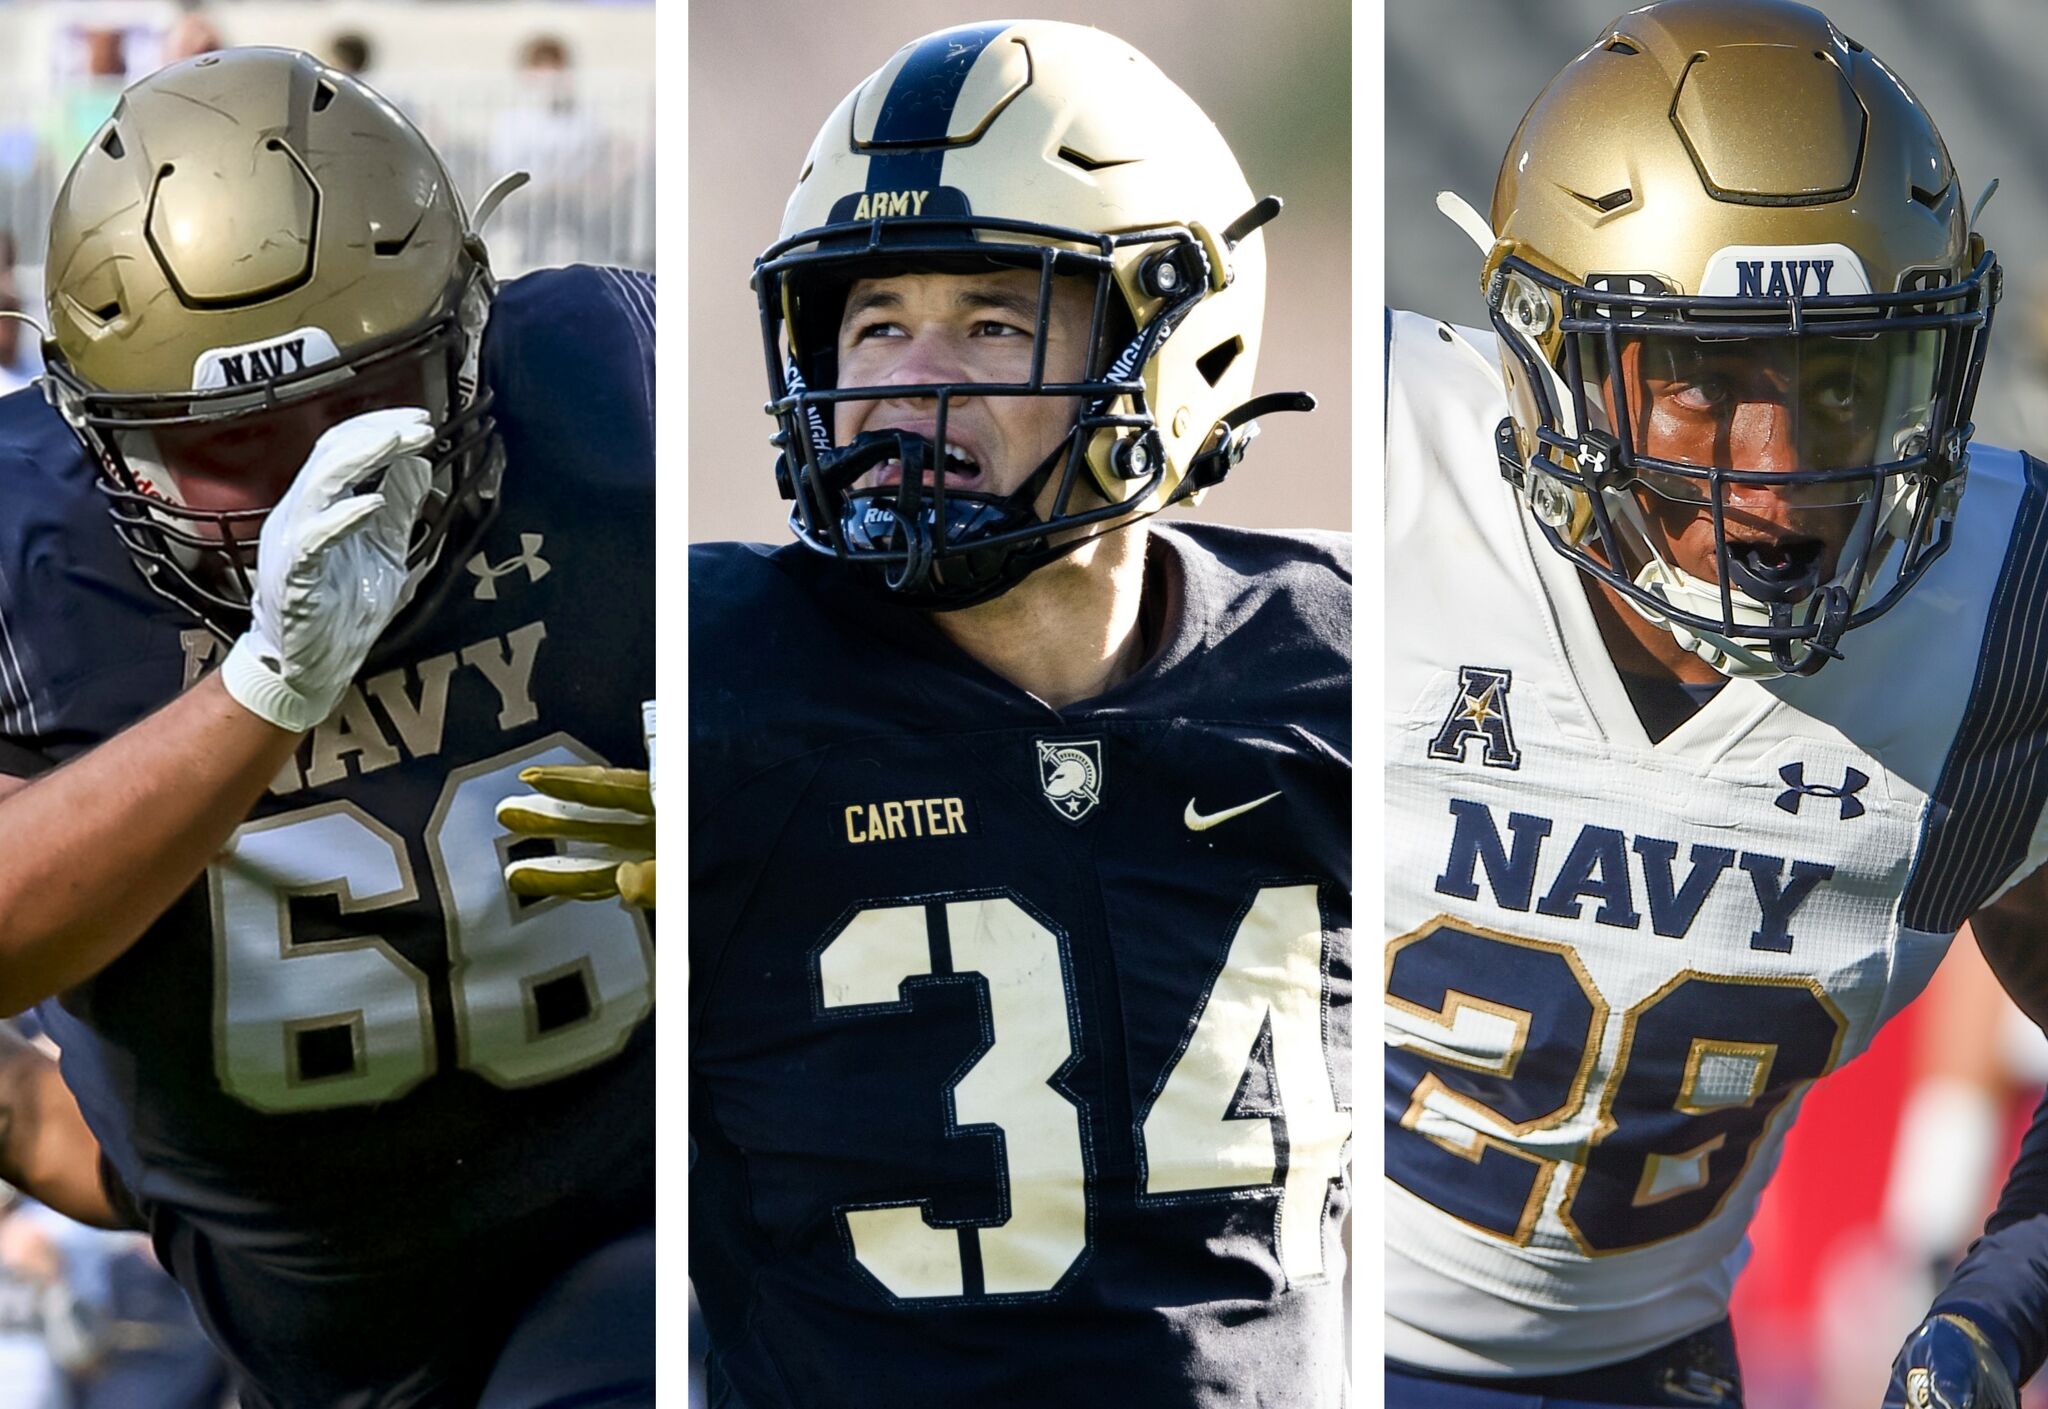 Army-Navy game: Players from Houston high schools to watch